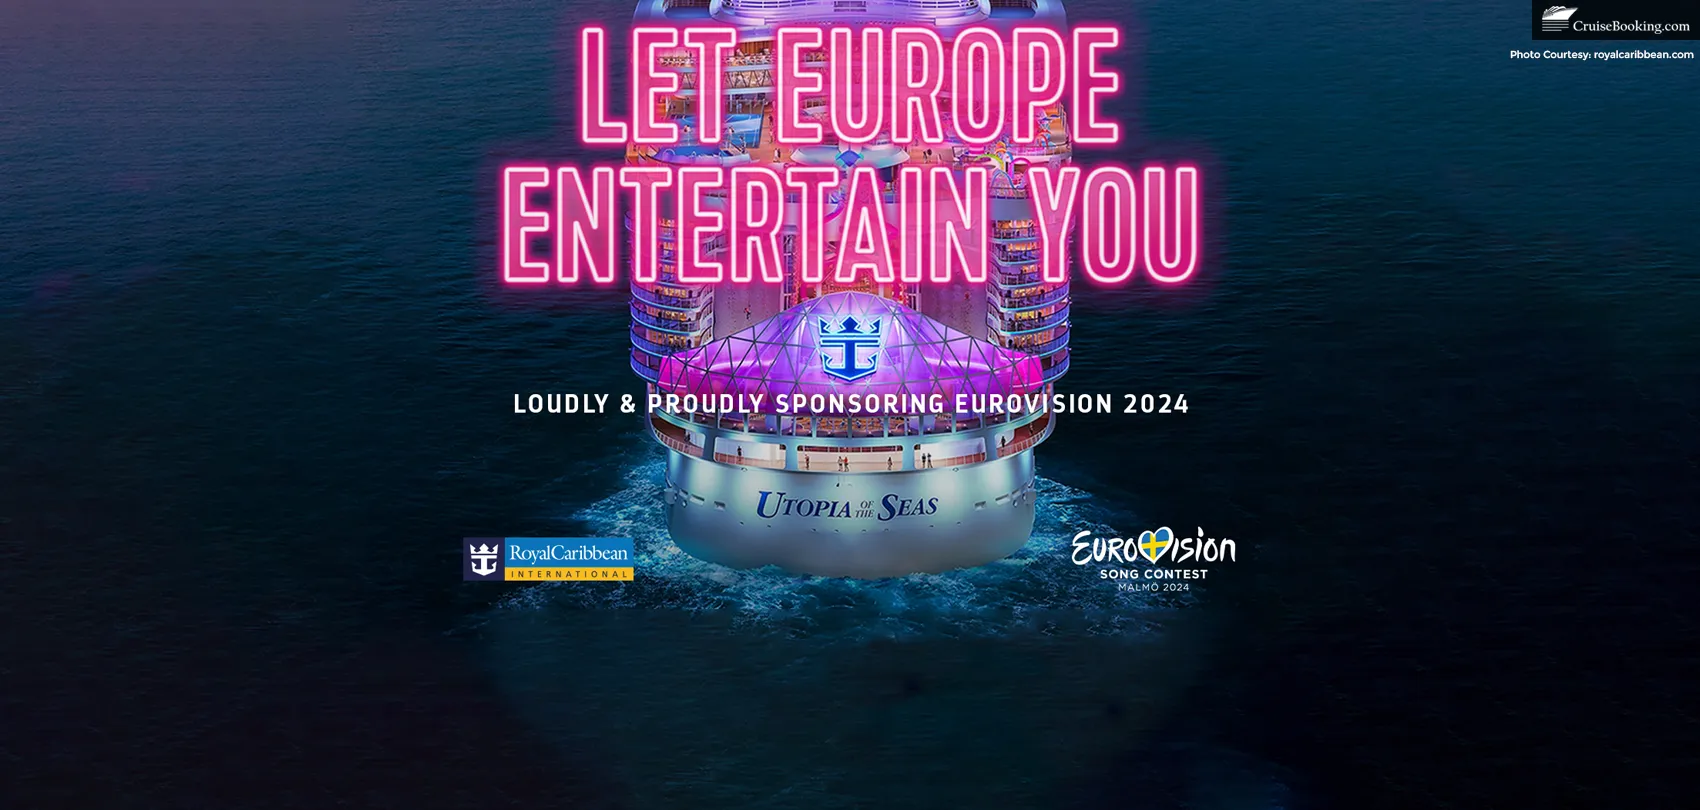 Royal Caribbean Teams up with Eurovision Song Contest